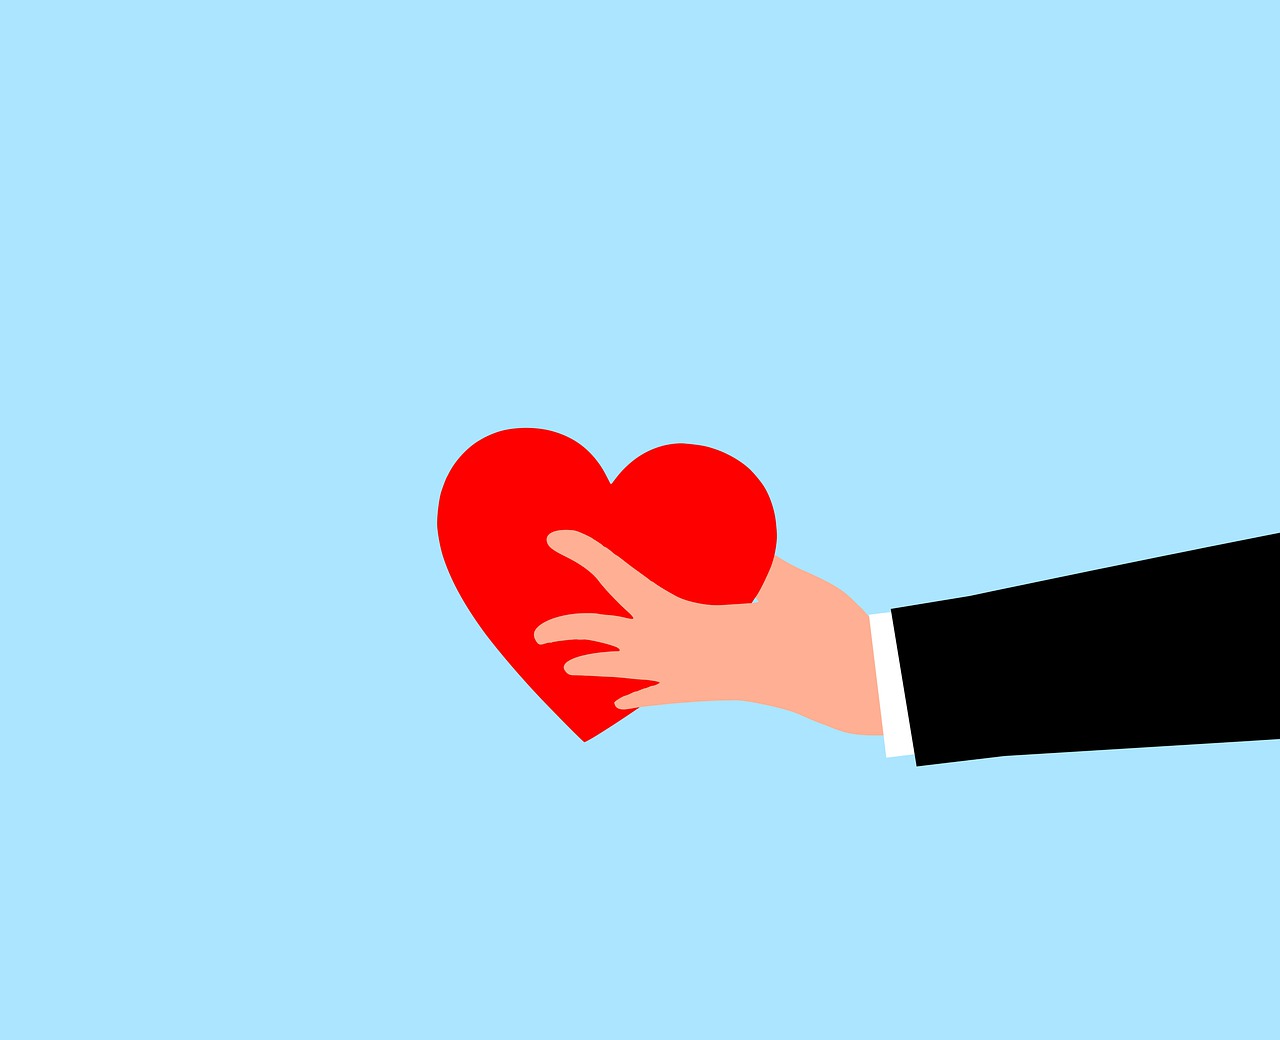 How Acts of Kindness and Charity Shape a Compassionate World